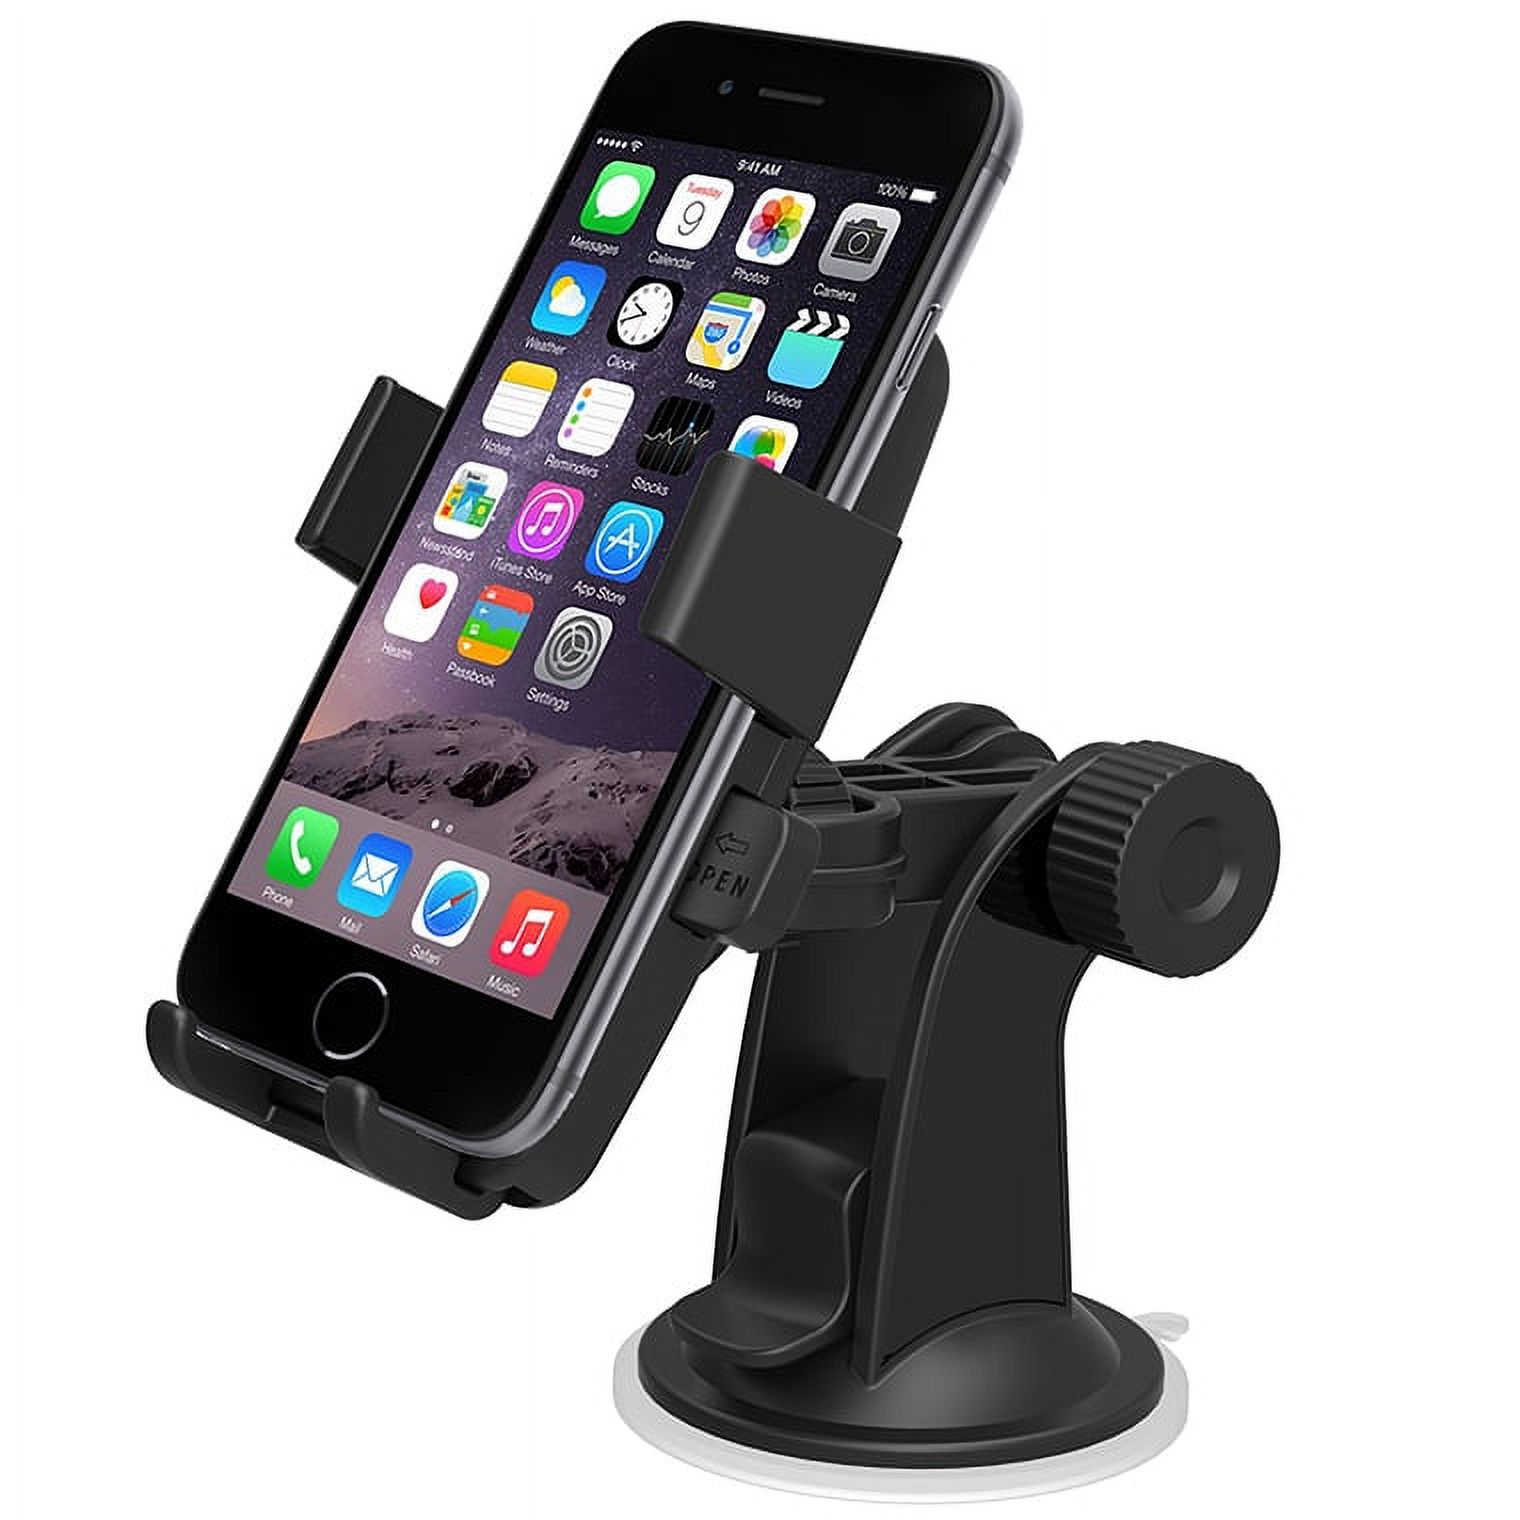 iOttie Easy One Touch Windshield Dashboard Car Mount Holder for iPhone 7/6s/6, Galaxy S8/S7- Retail Packaging- Black - image 1 of 6